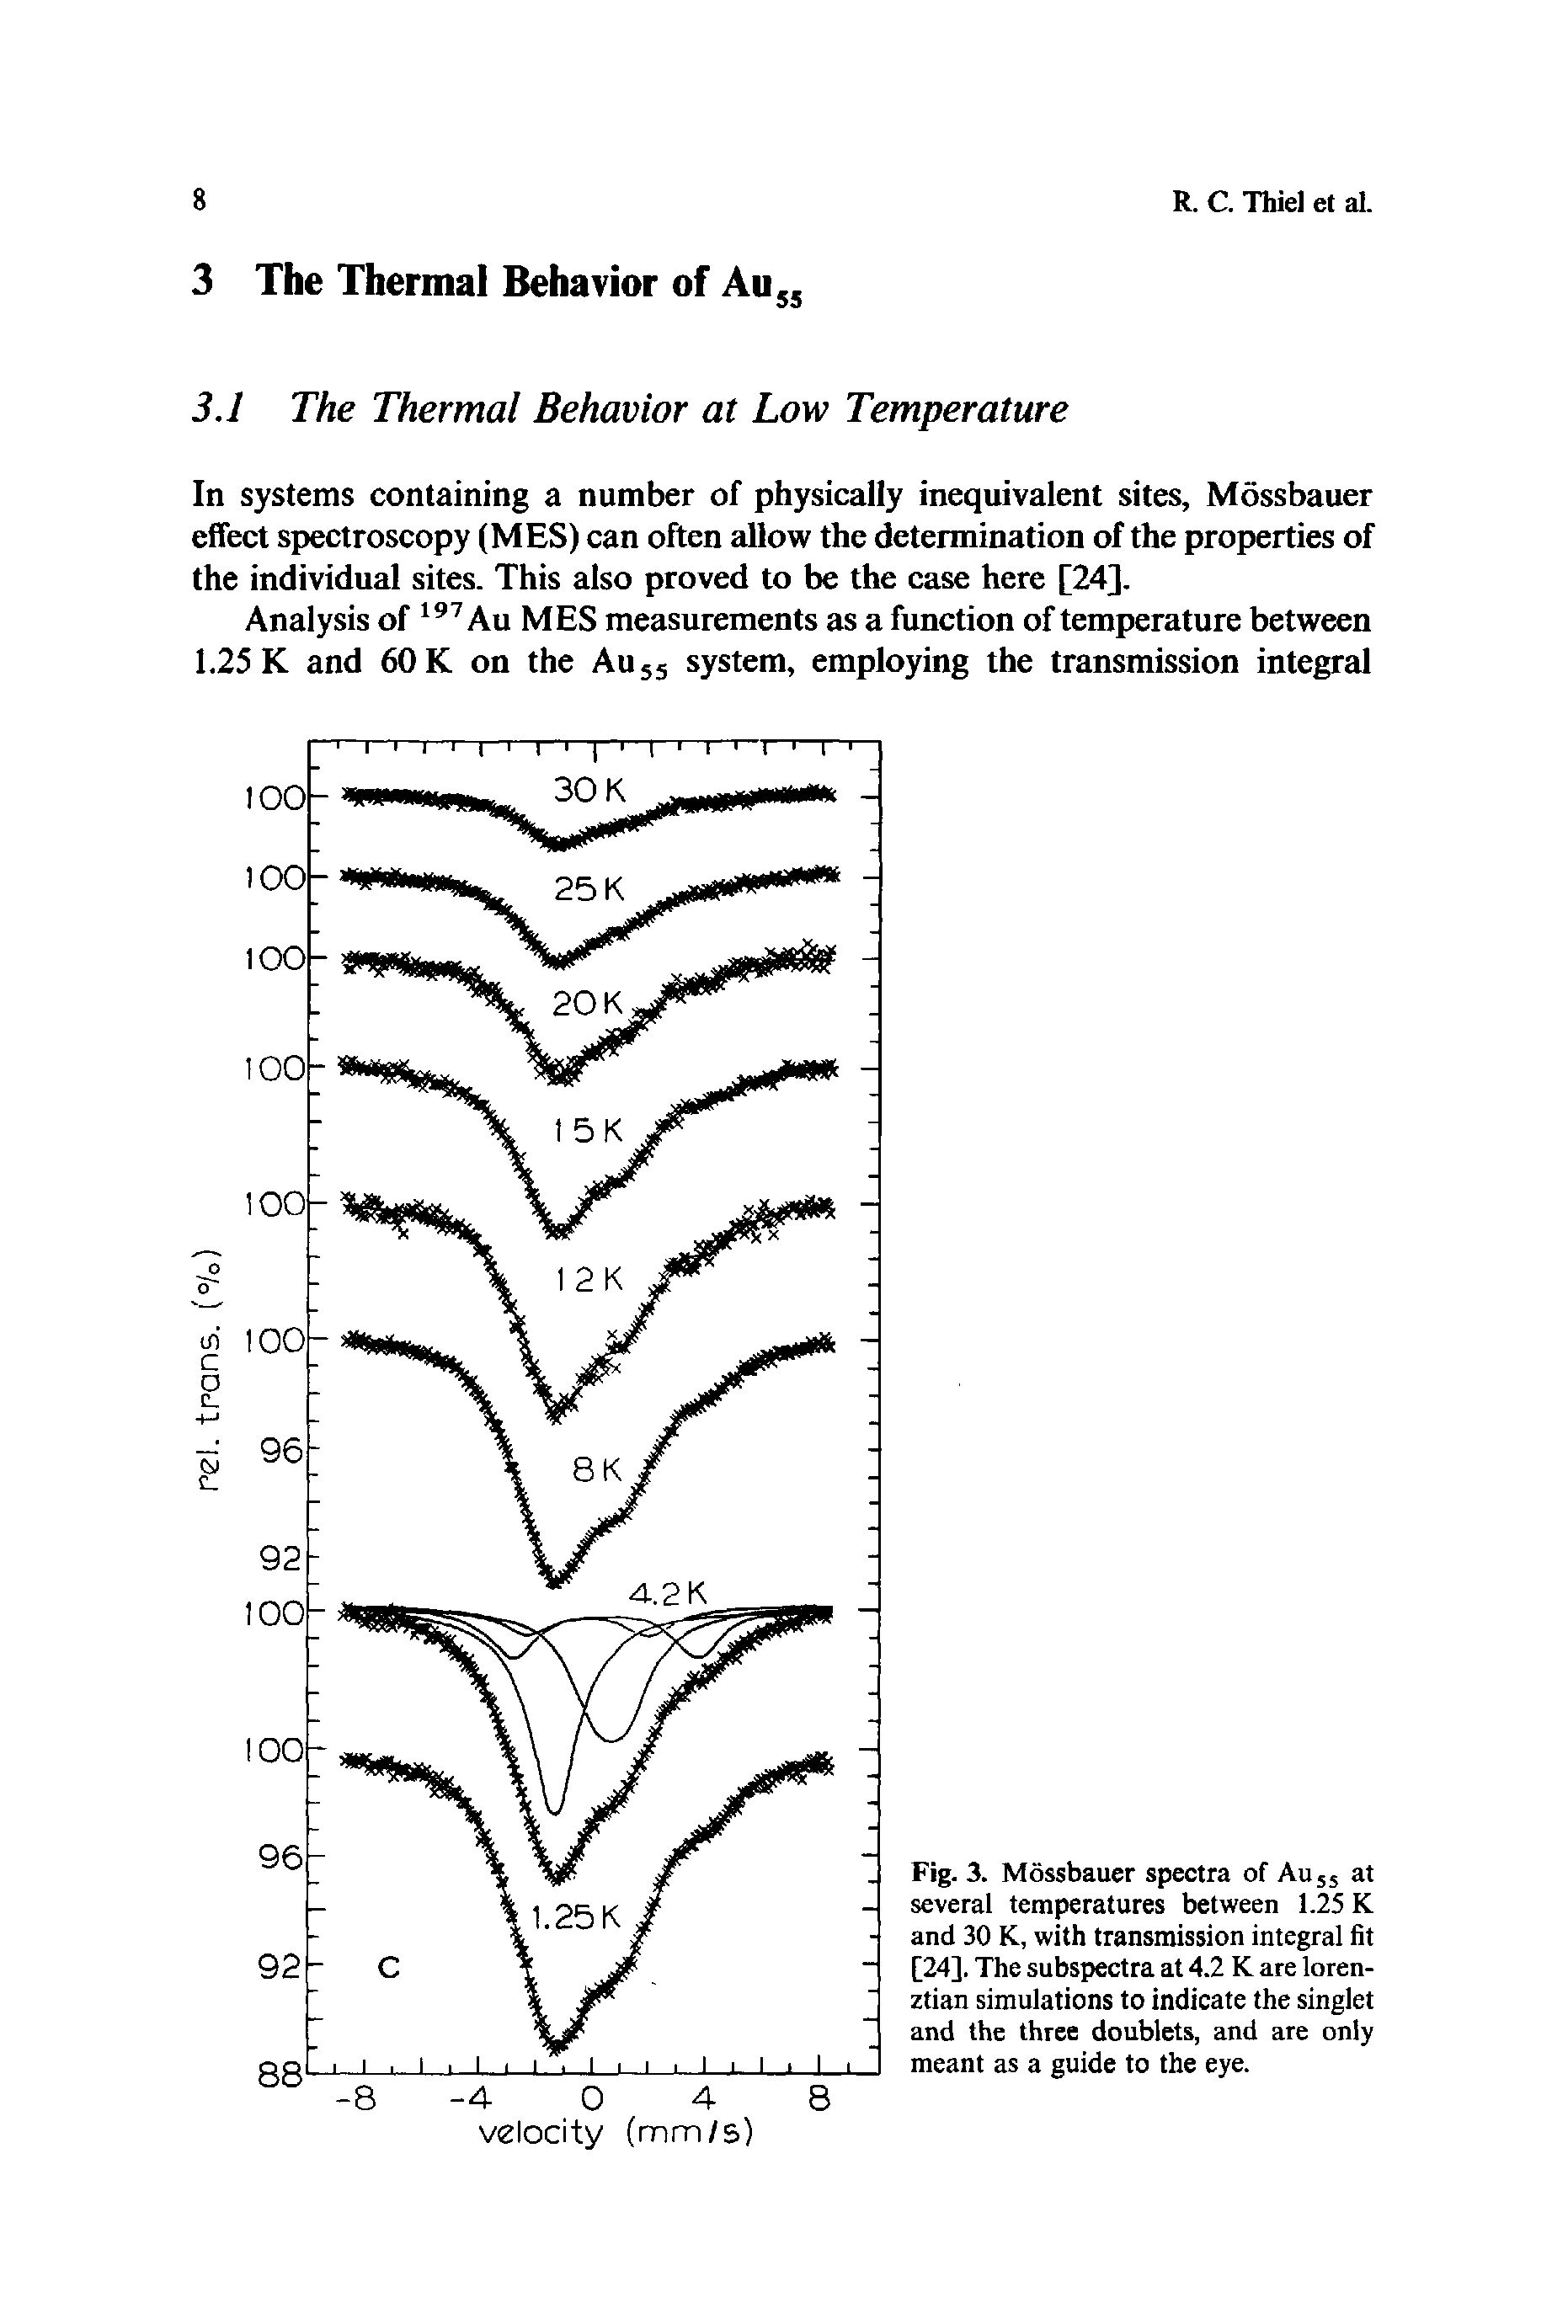 Fig. 3. Mossbauer spectra of AU55 at several temperatures between 1.25 K and 30 K, with transmission integral fit [24], The subspectra at 4.2 K are loren-ztian simulations to indicate the singlet and the three doublets, and are only meant as a guide to the eye.